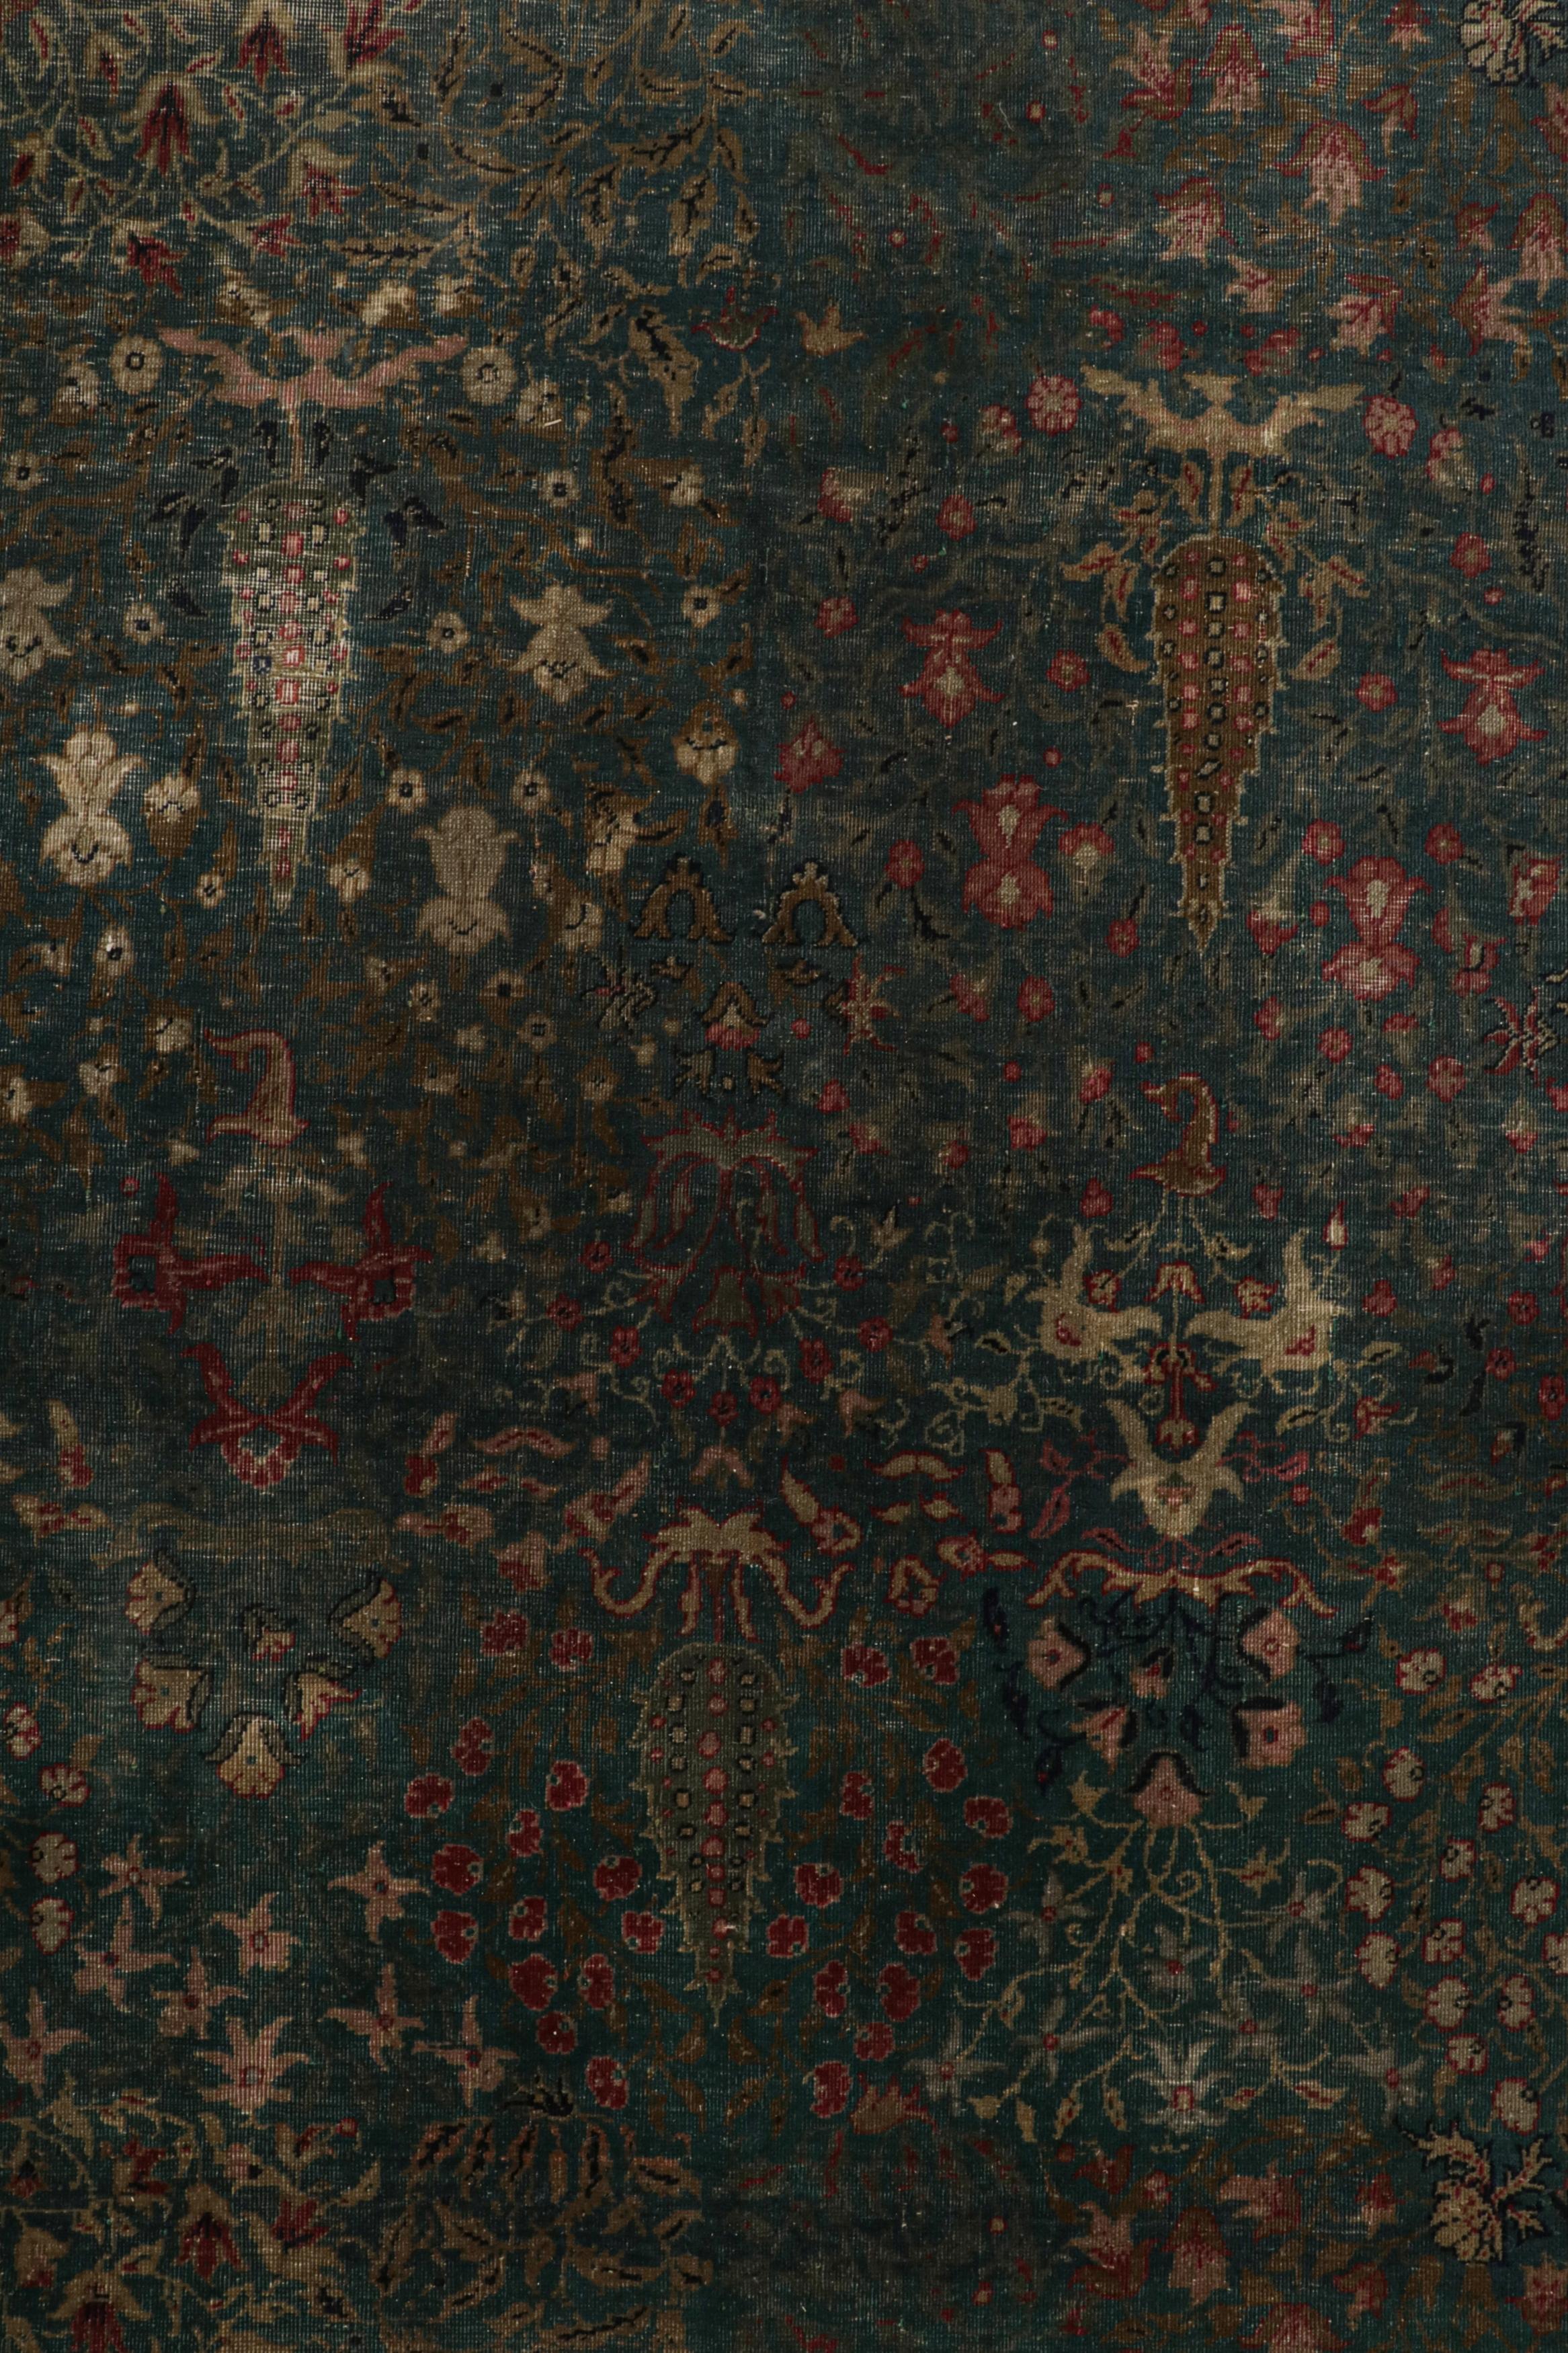 Late 19th Century Antique Sivas Rug in Teal, with Floral Patterns, from Rug & Kilim For Sale